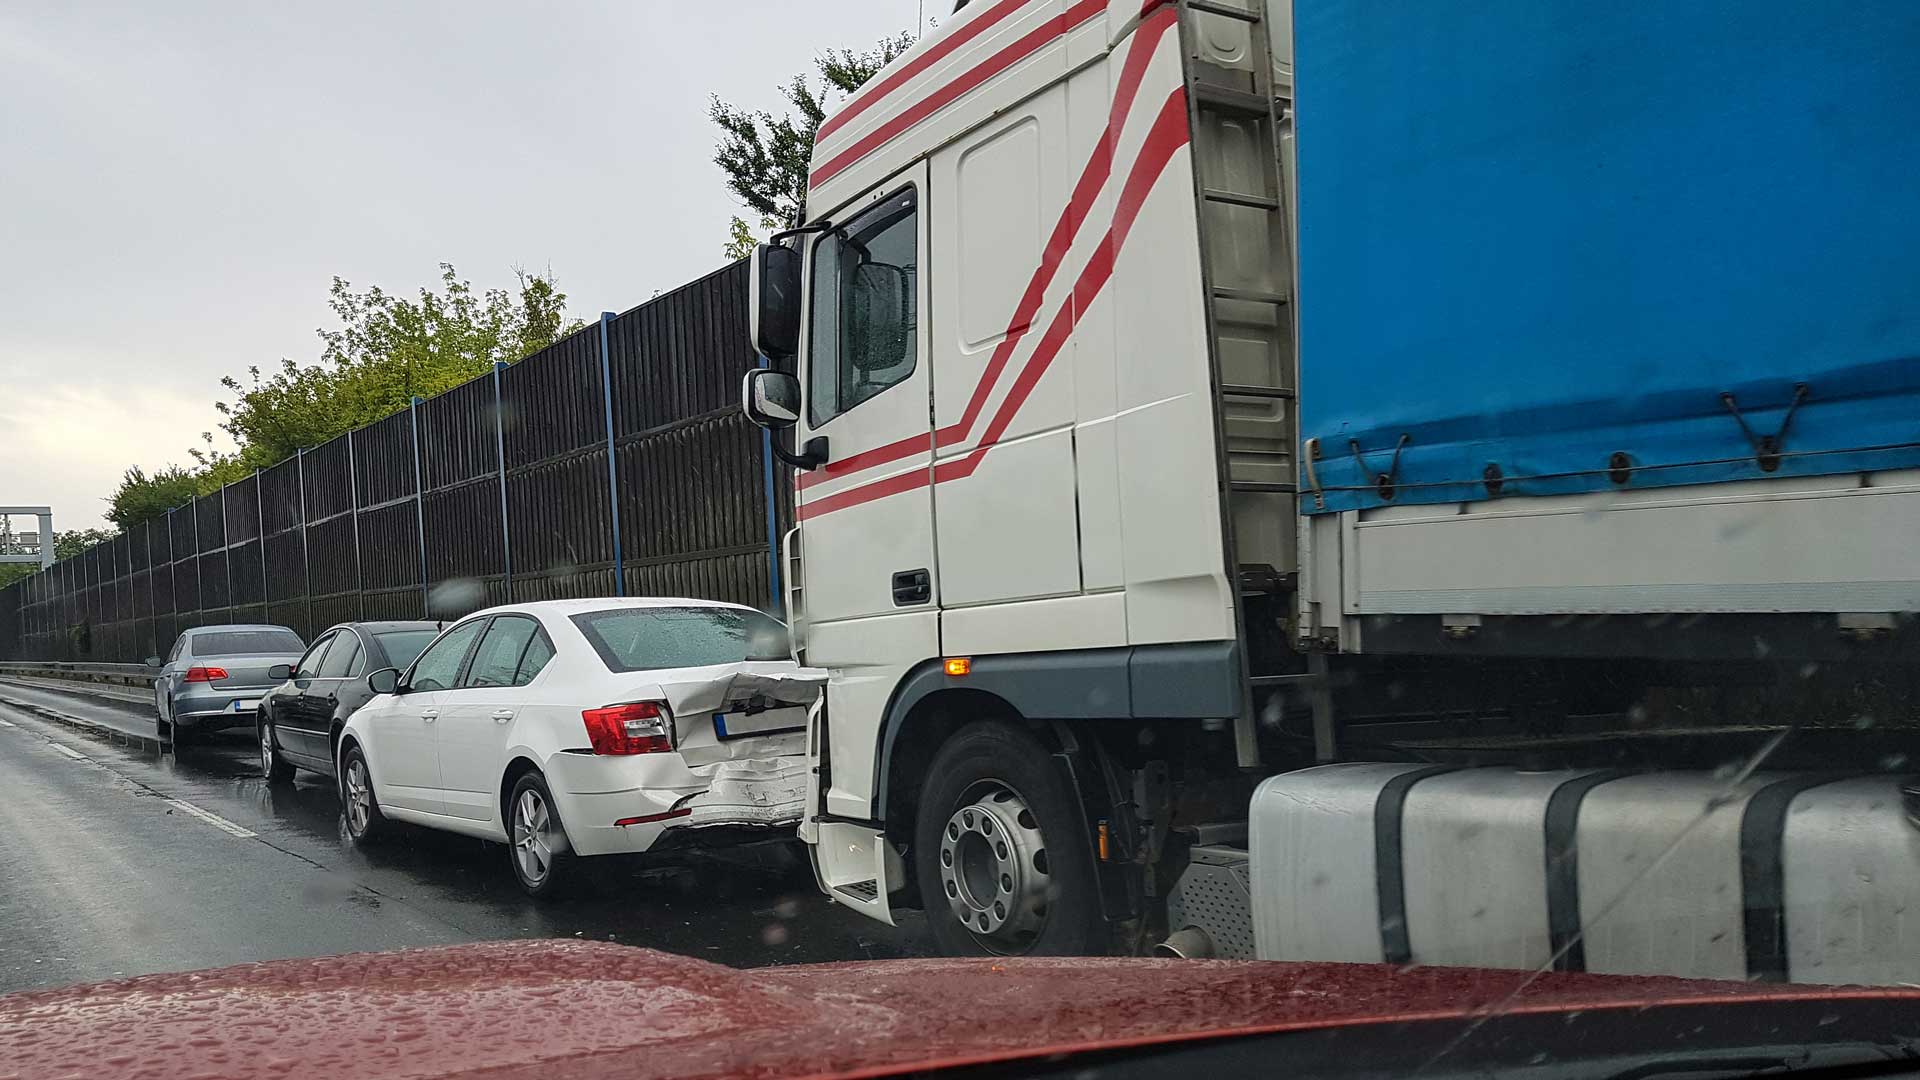 Accident in the rain with a truck hitting a car